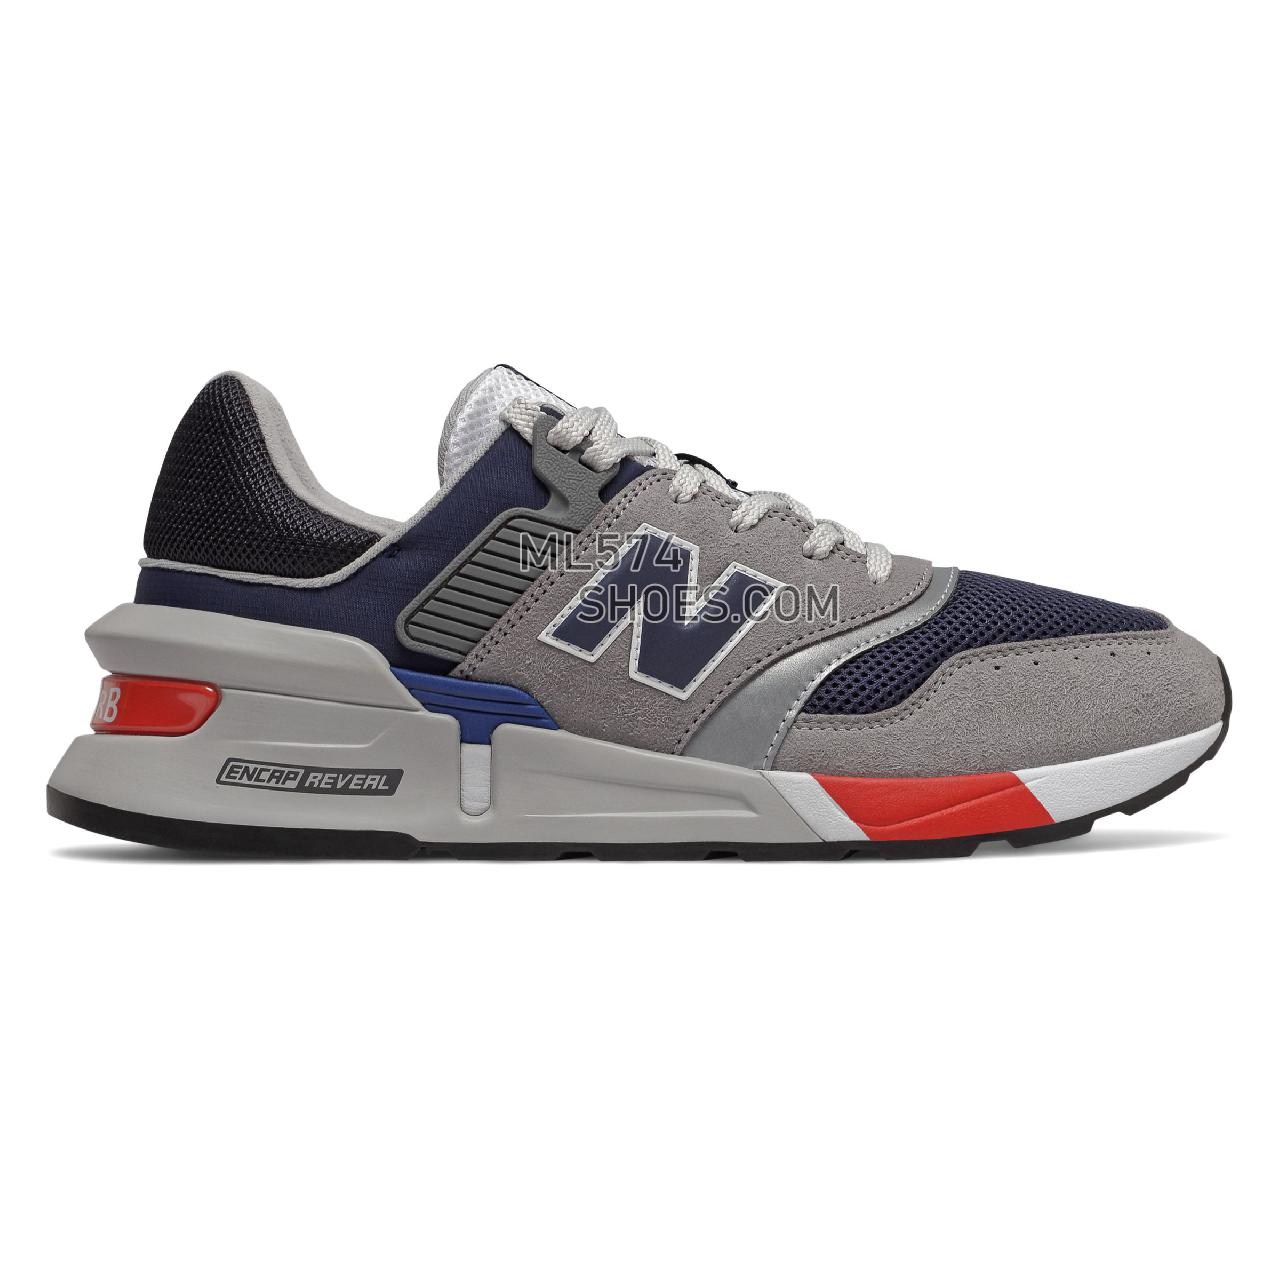 New Balance 997 Sport - Men's 997 Sport Classic - Marblehead with Pigment - MS997LOQ